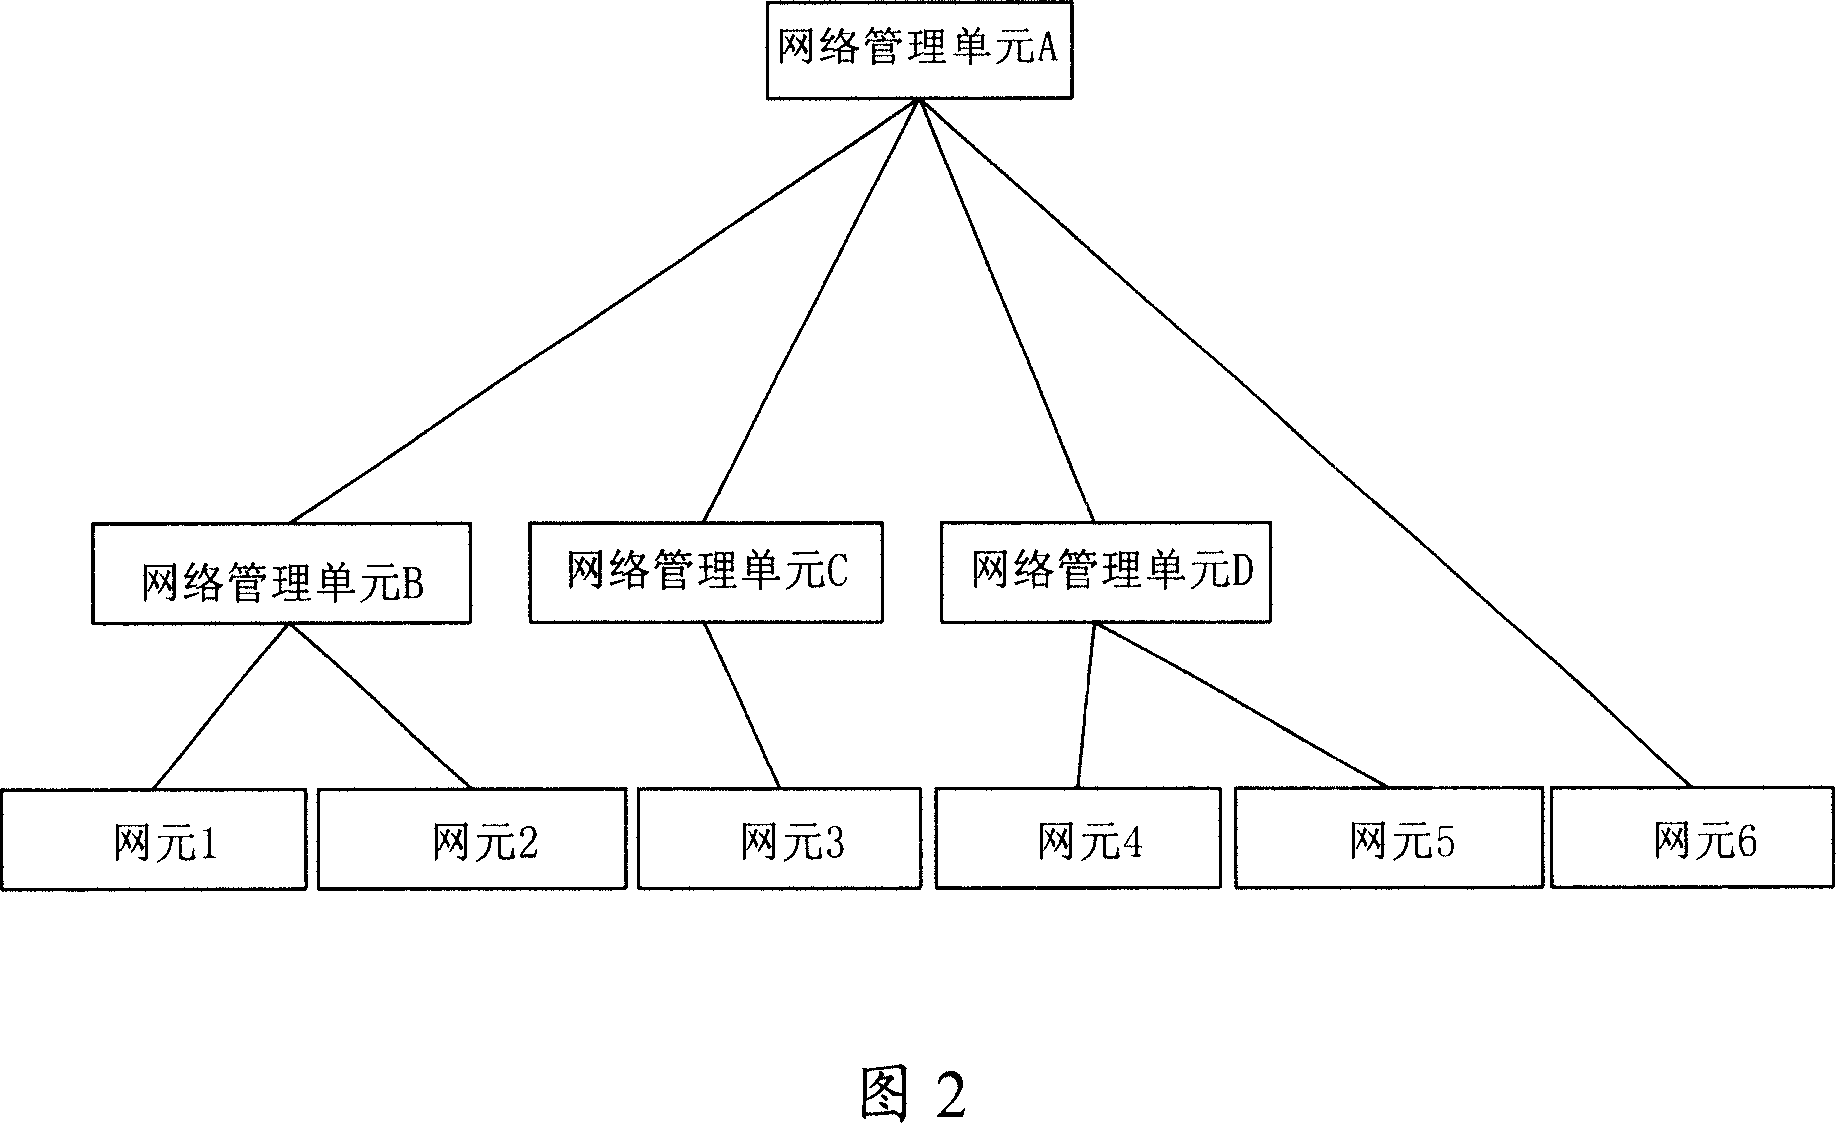 Network element management method and system